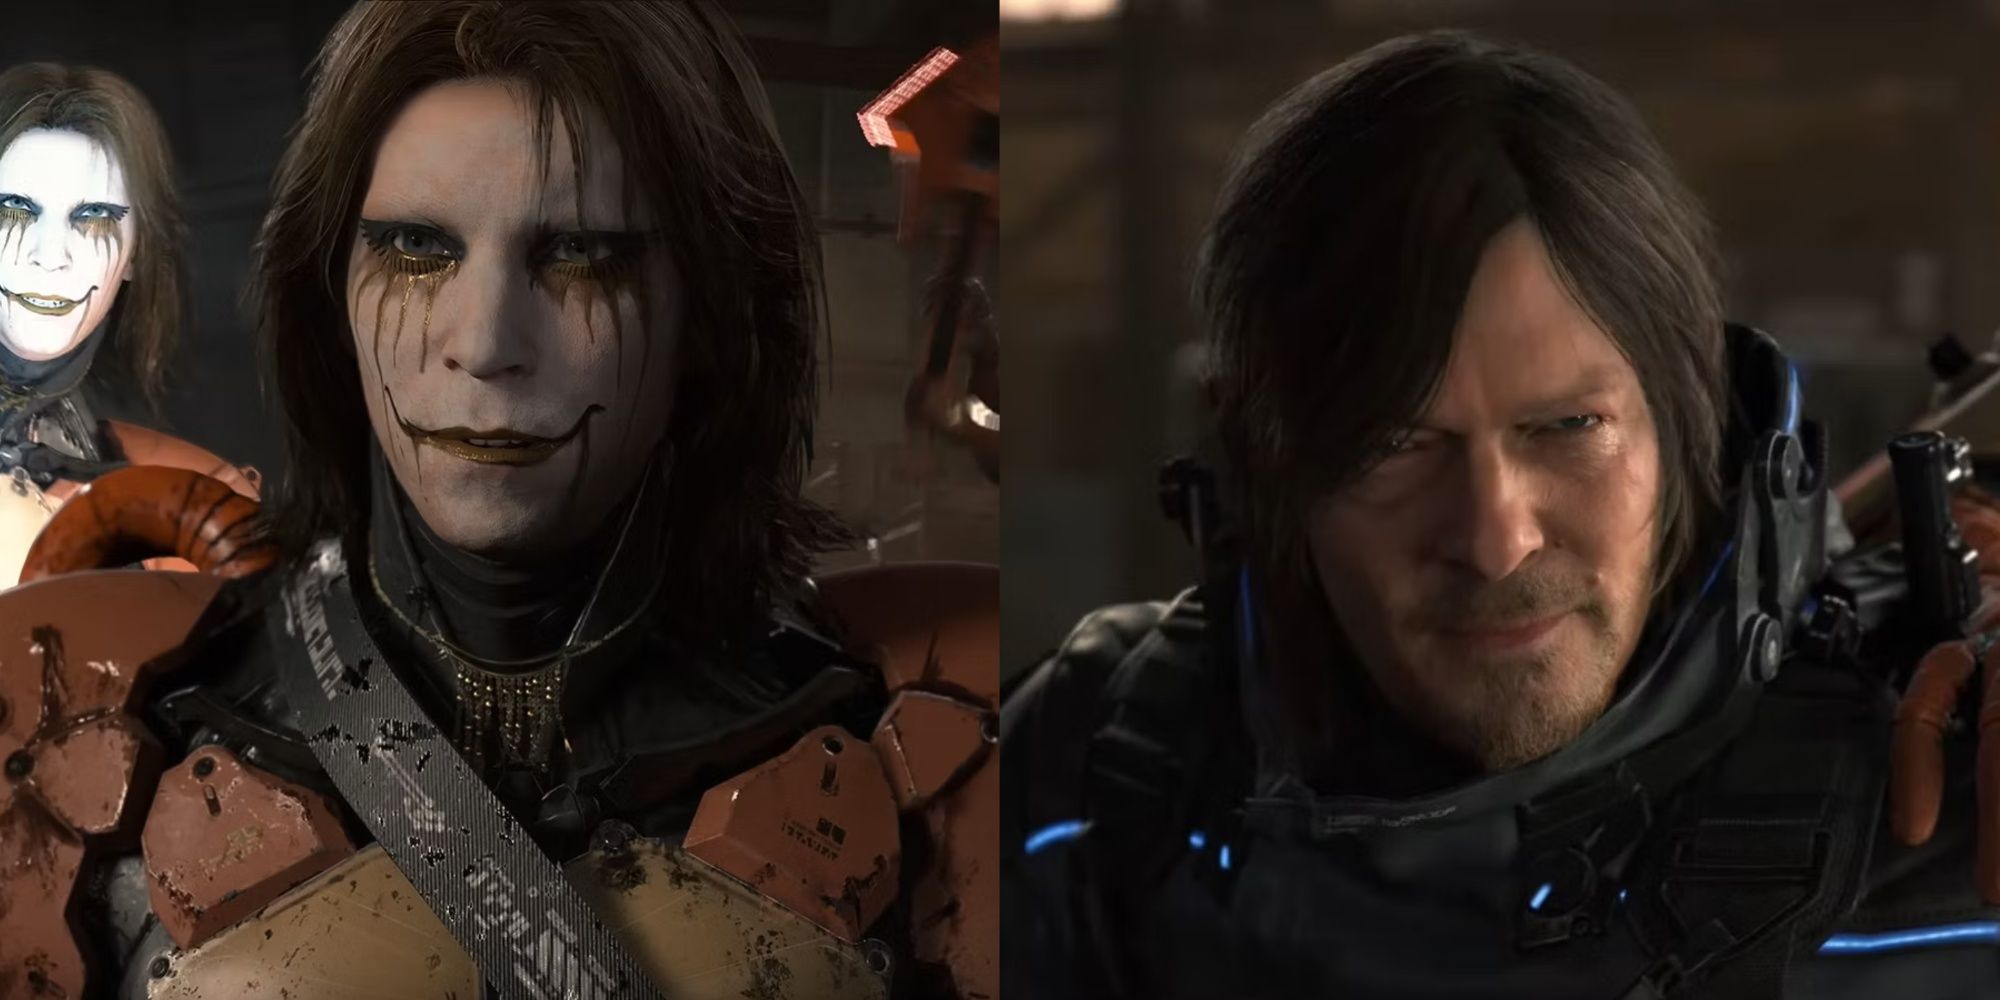 A combined image of Higgs Monaghan and Sam Porter Bridges from Death Stranding 2 promos